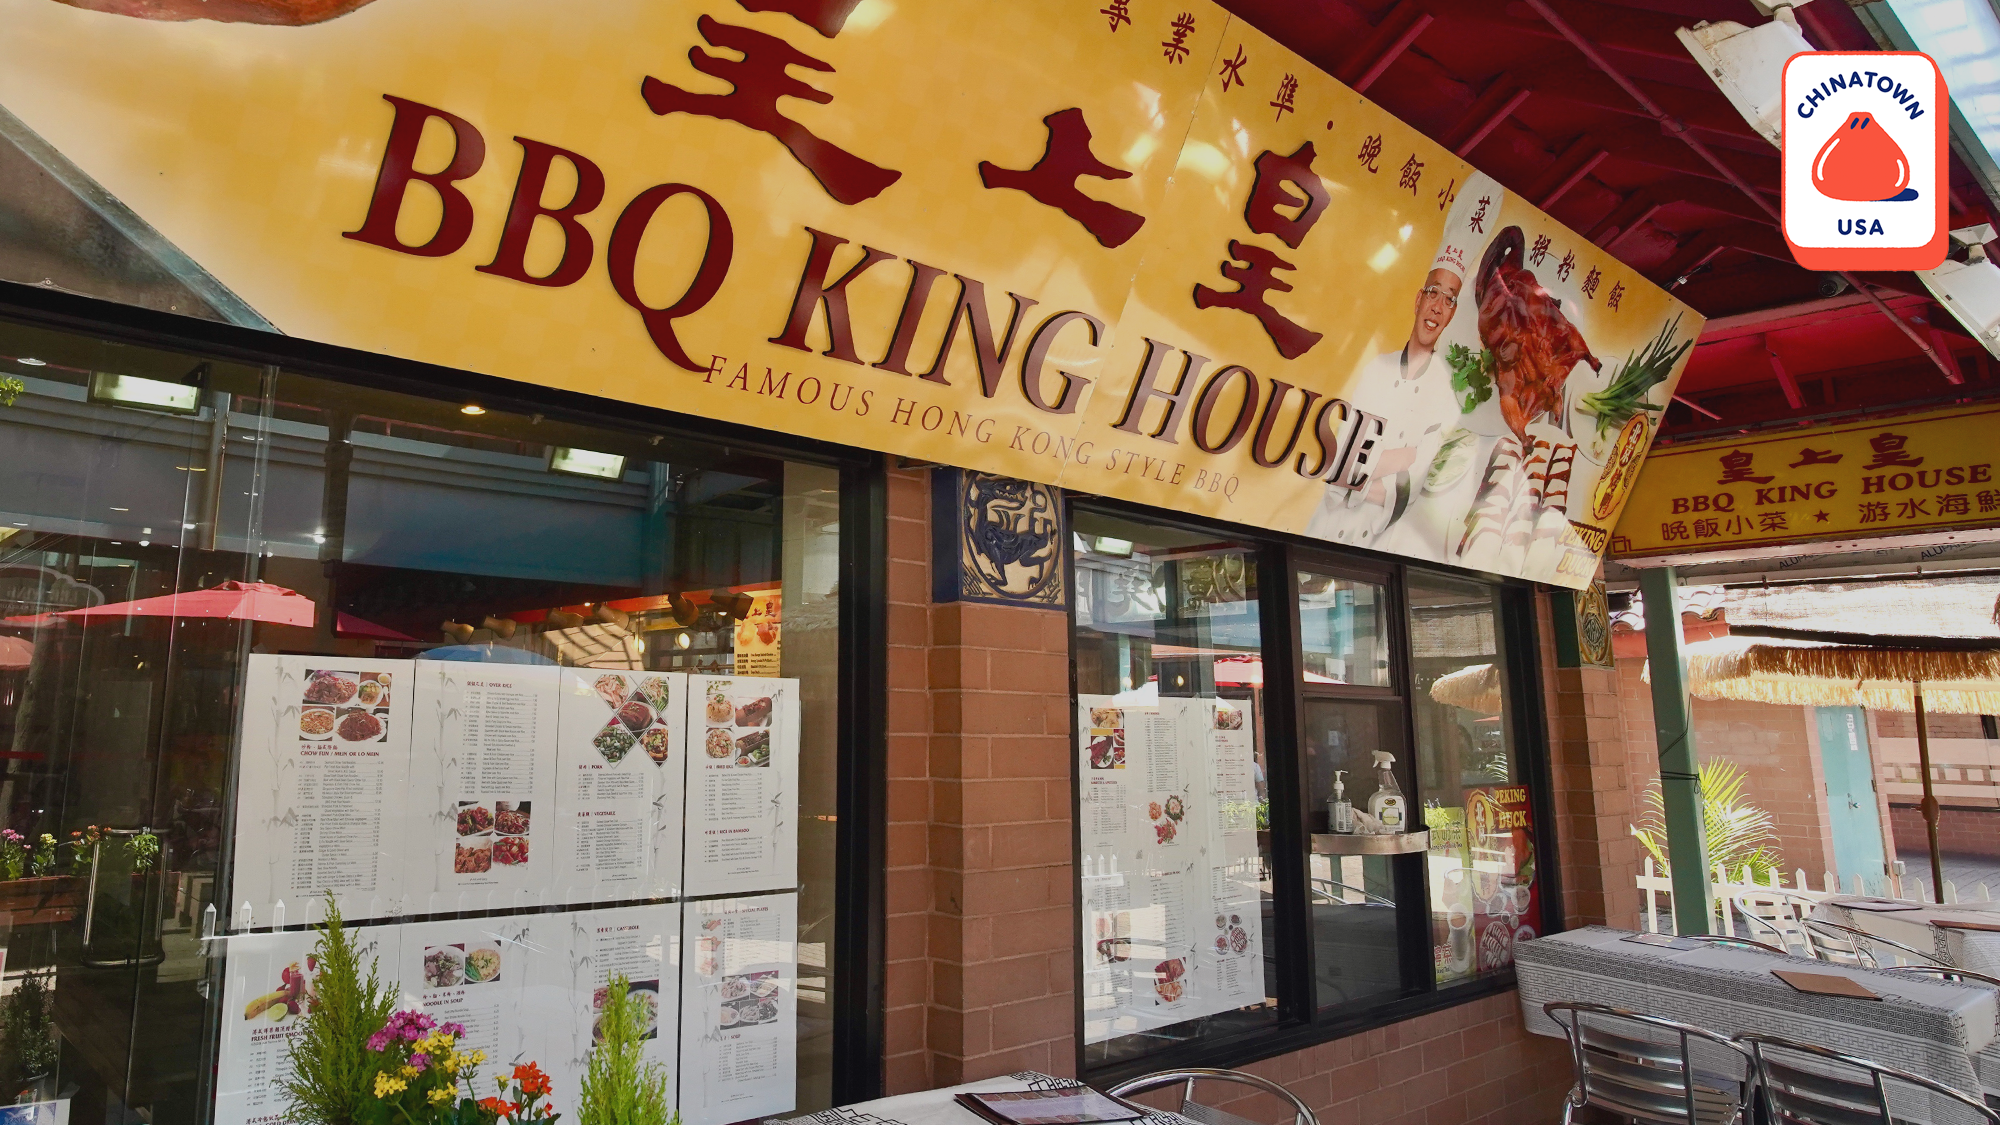 BBQ King House remains one of the best dining deals in Chicago. // Credit: Kevin Pang